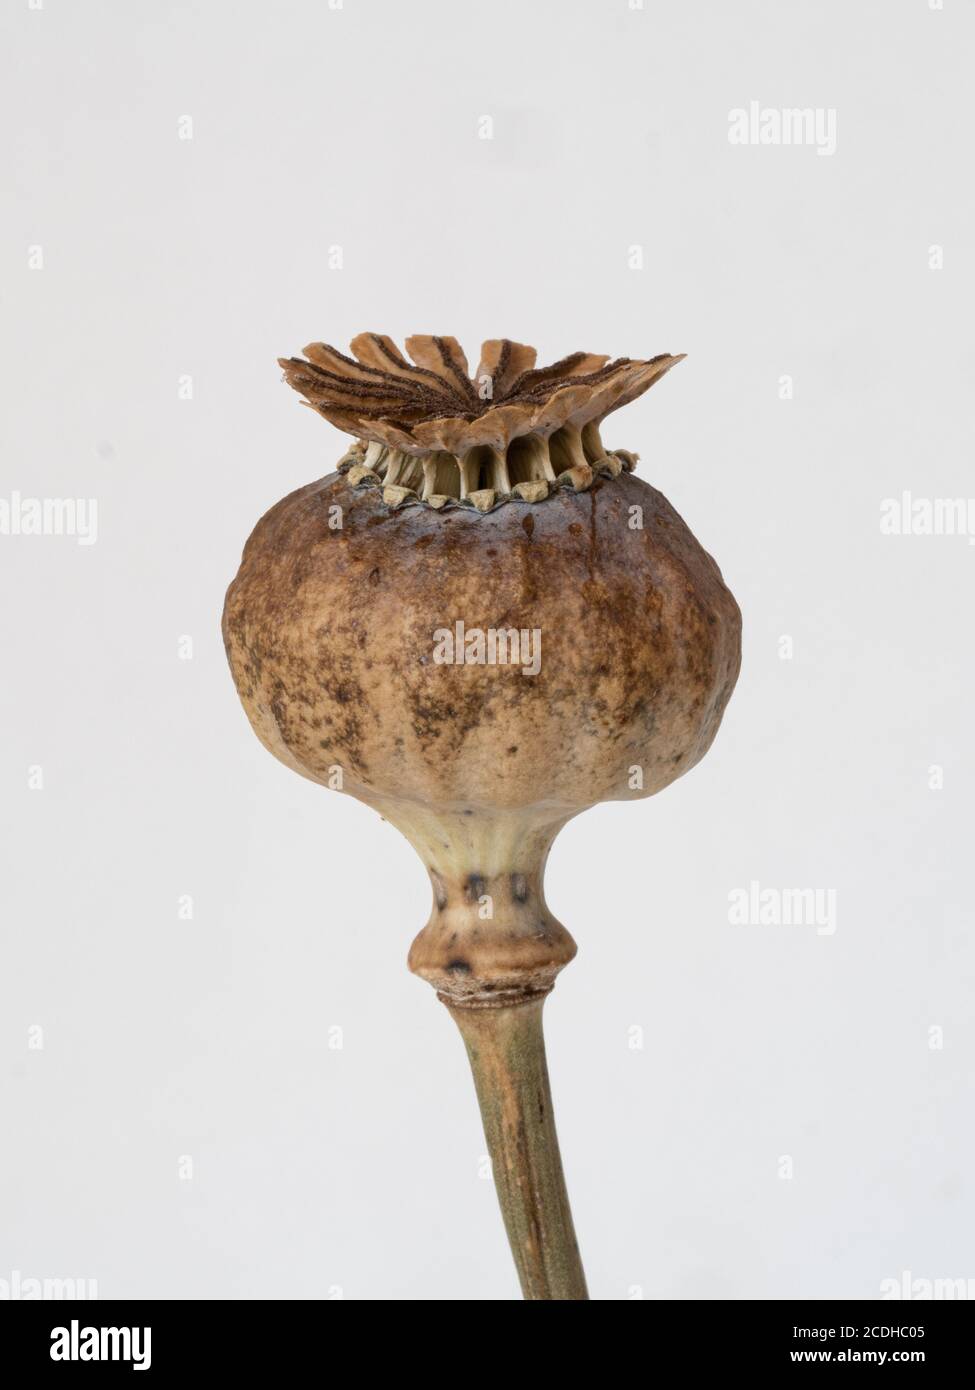 A close up of the ripe brown pepper pot seed head of a poppy against a plain background Stock Photo